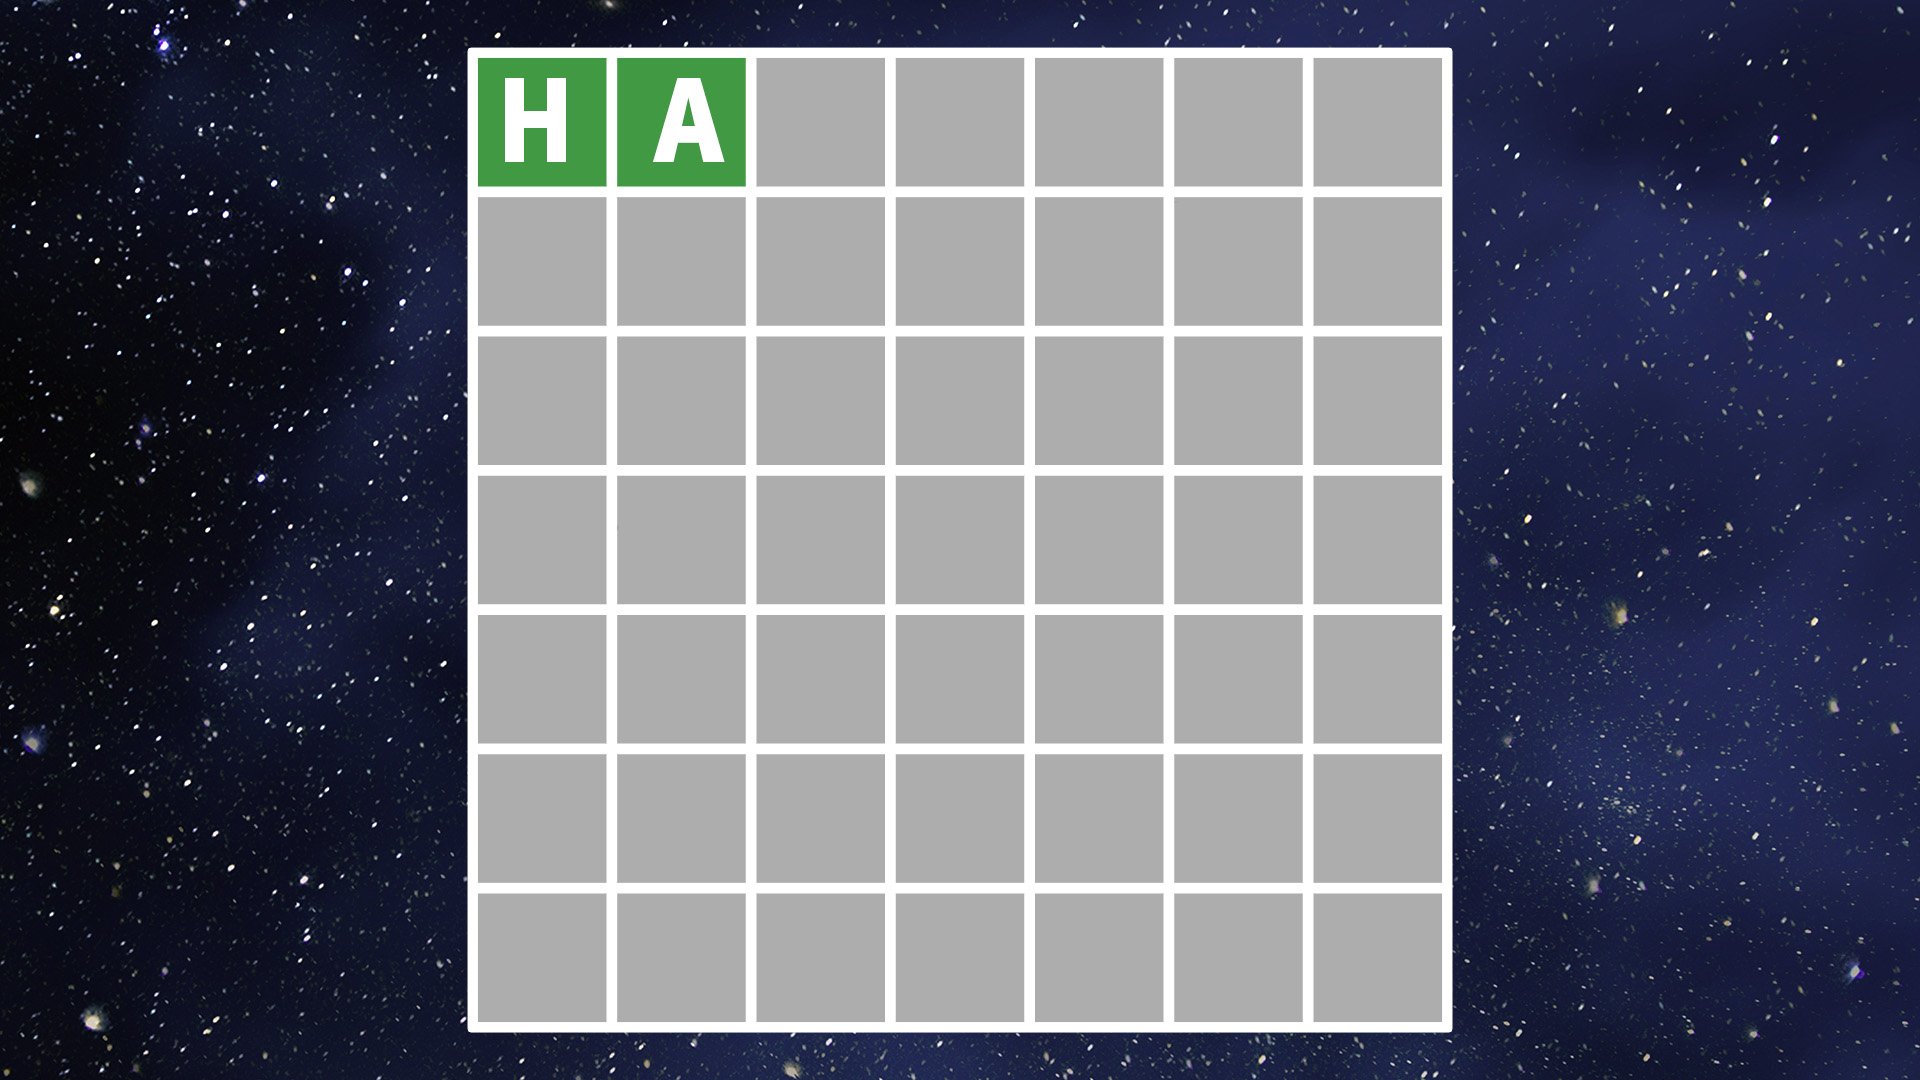 Wordle grid with the word HA to start you off